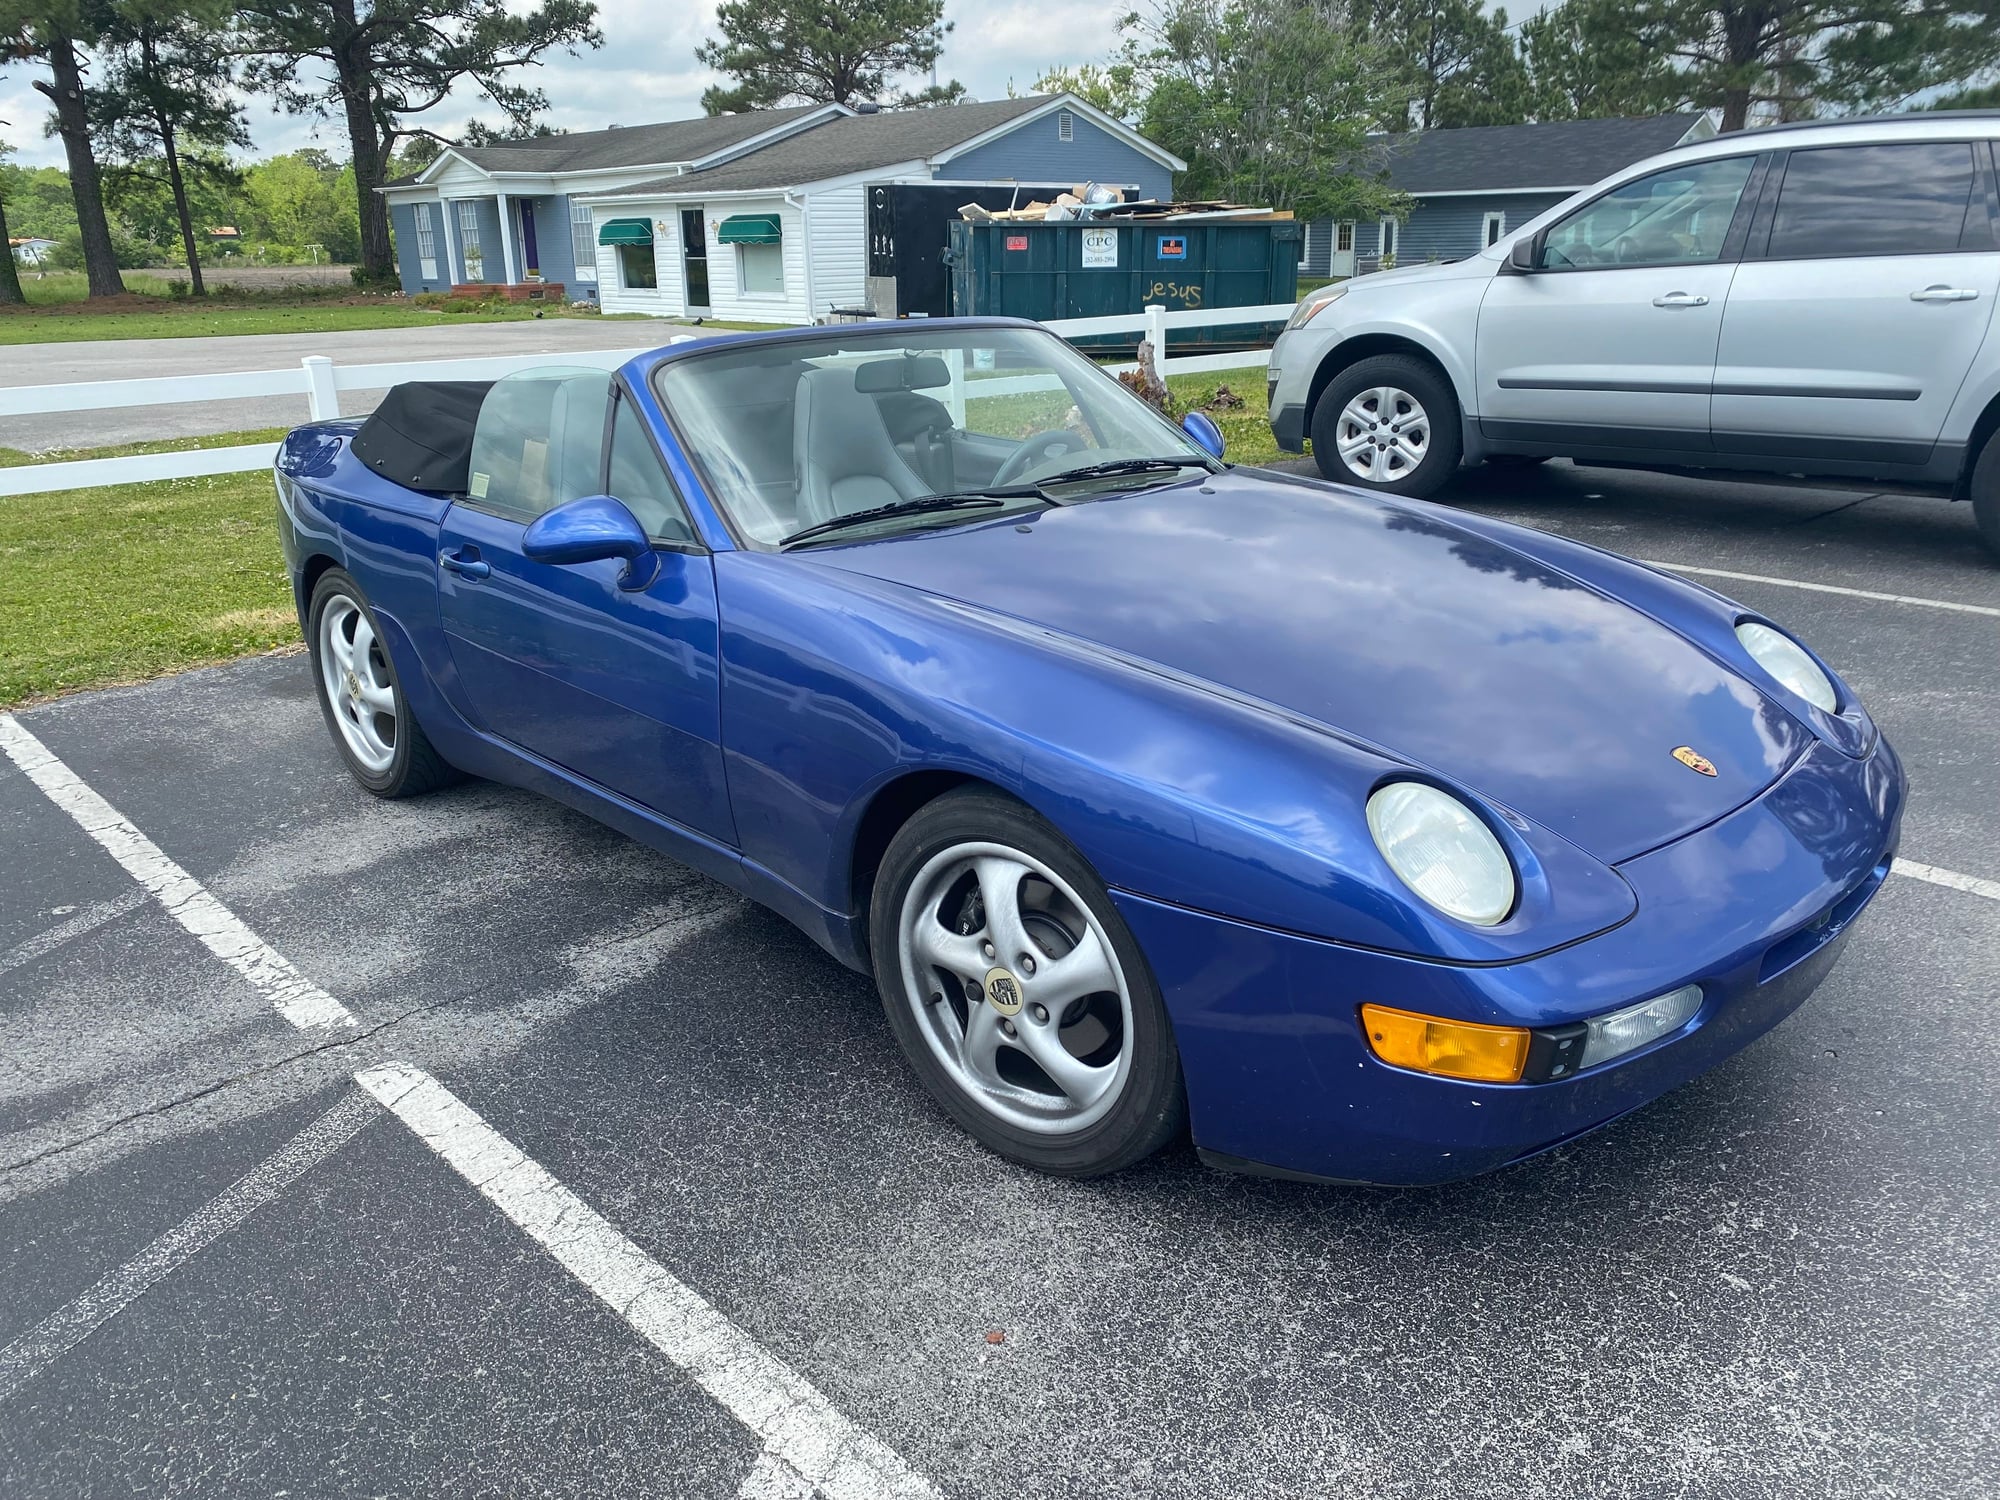 1992 Porsche 968 - 1992 Porsche 968 Convertible for sale - Used - VIN WPOCA296XNS840201 - 81,000 Miles - 4 cyl - 2WD - Manual - Convertible - Blue - Hubert, NC 28539, United States